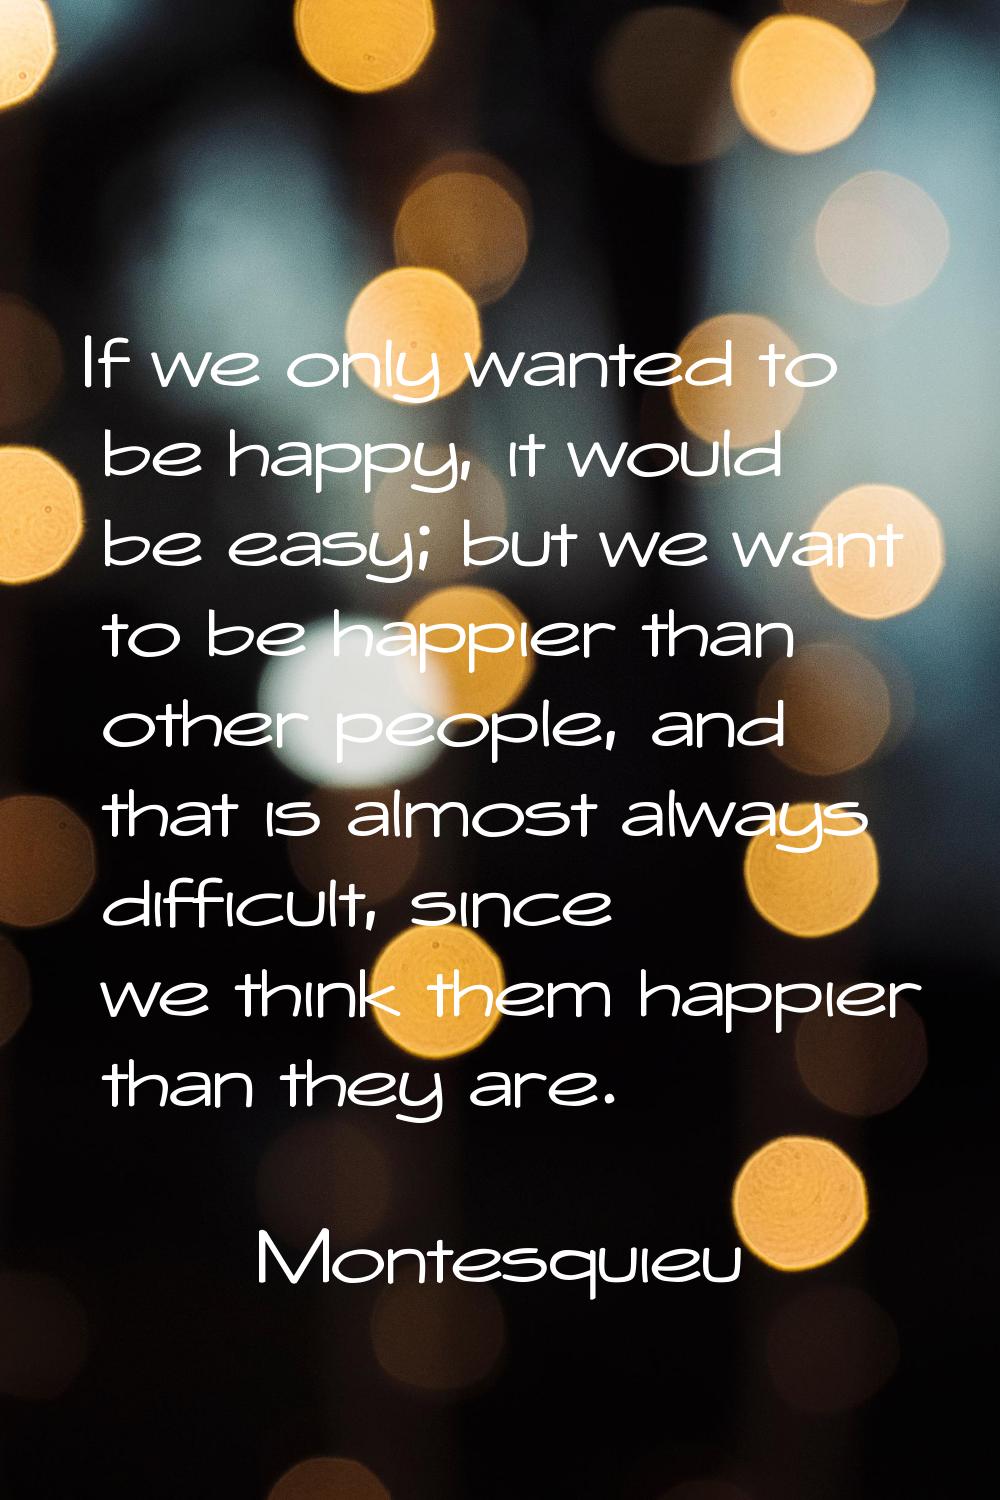 If we only wanted to be happy, it would be easy; but we want to be happier than other people, and t